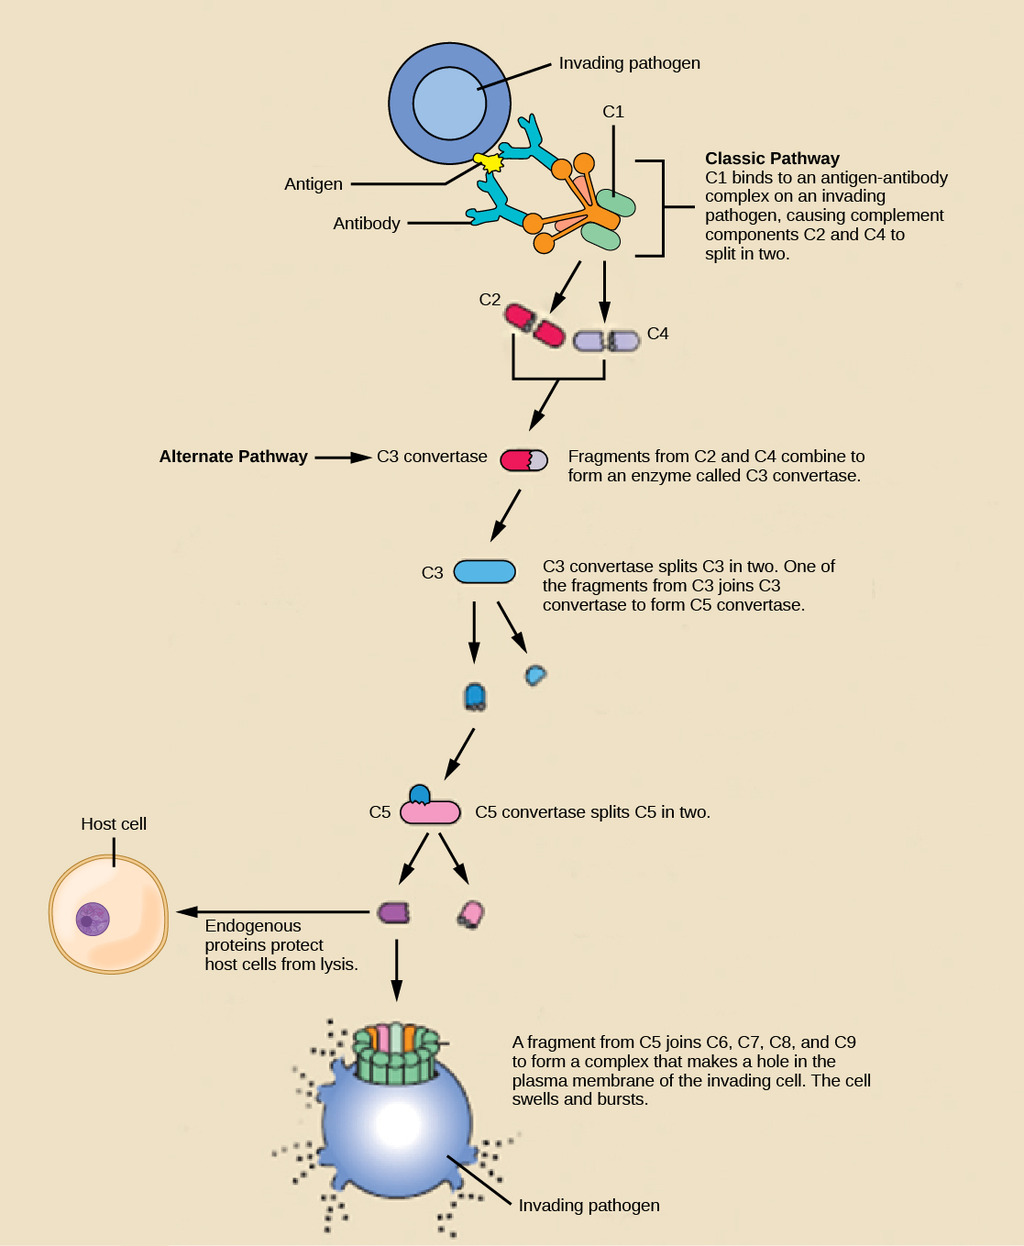 Complement cascade in the innate immune response